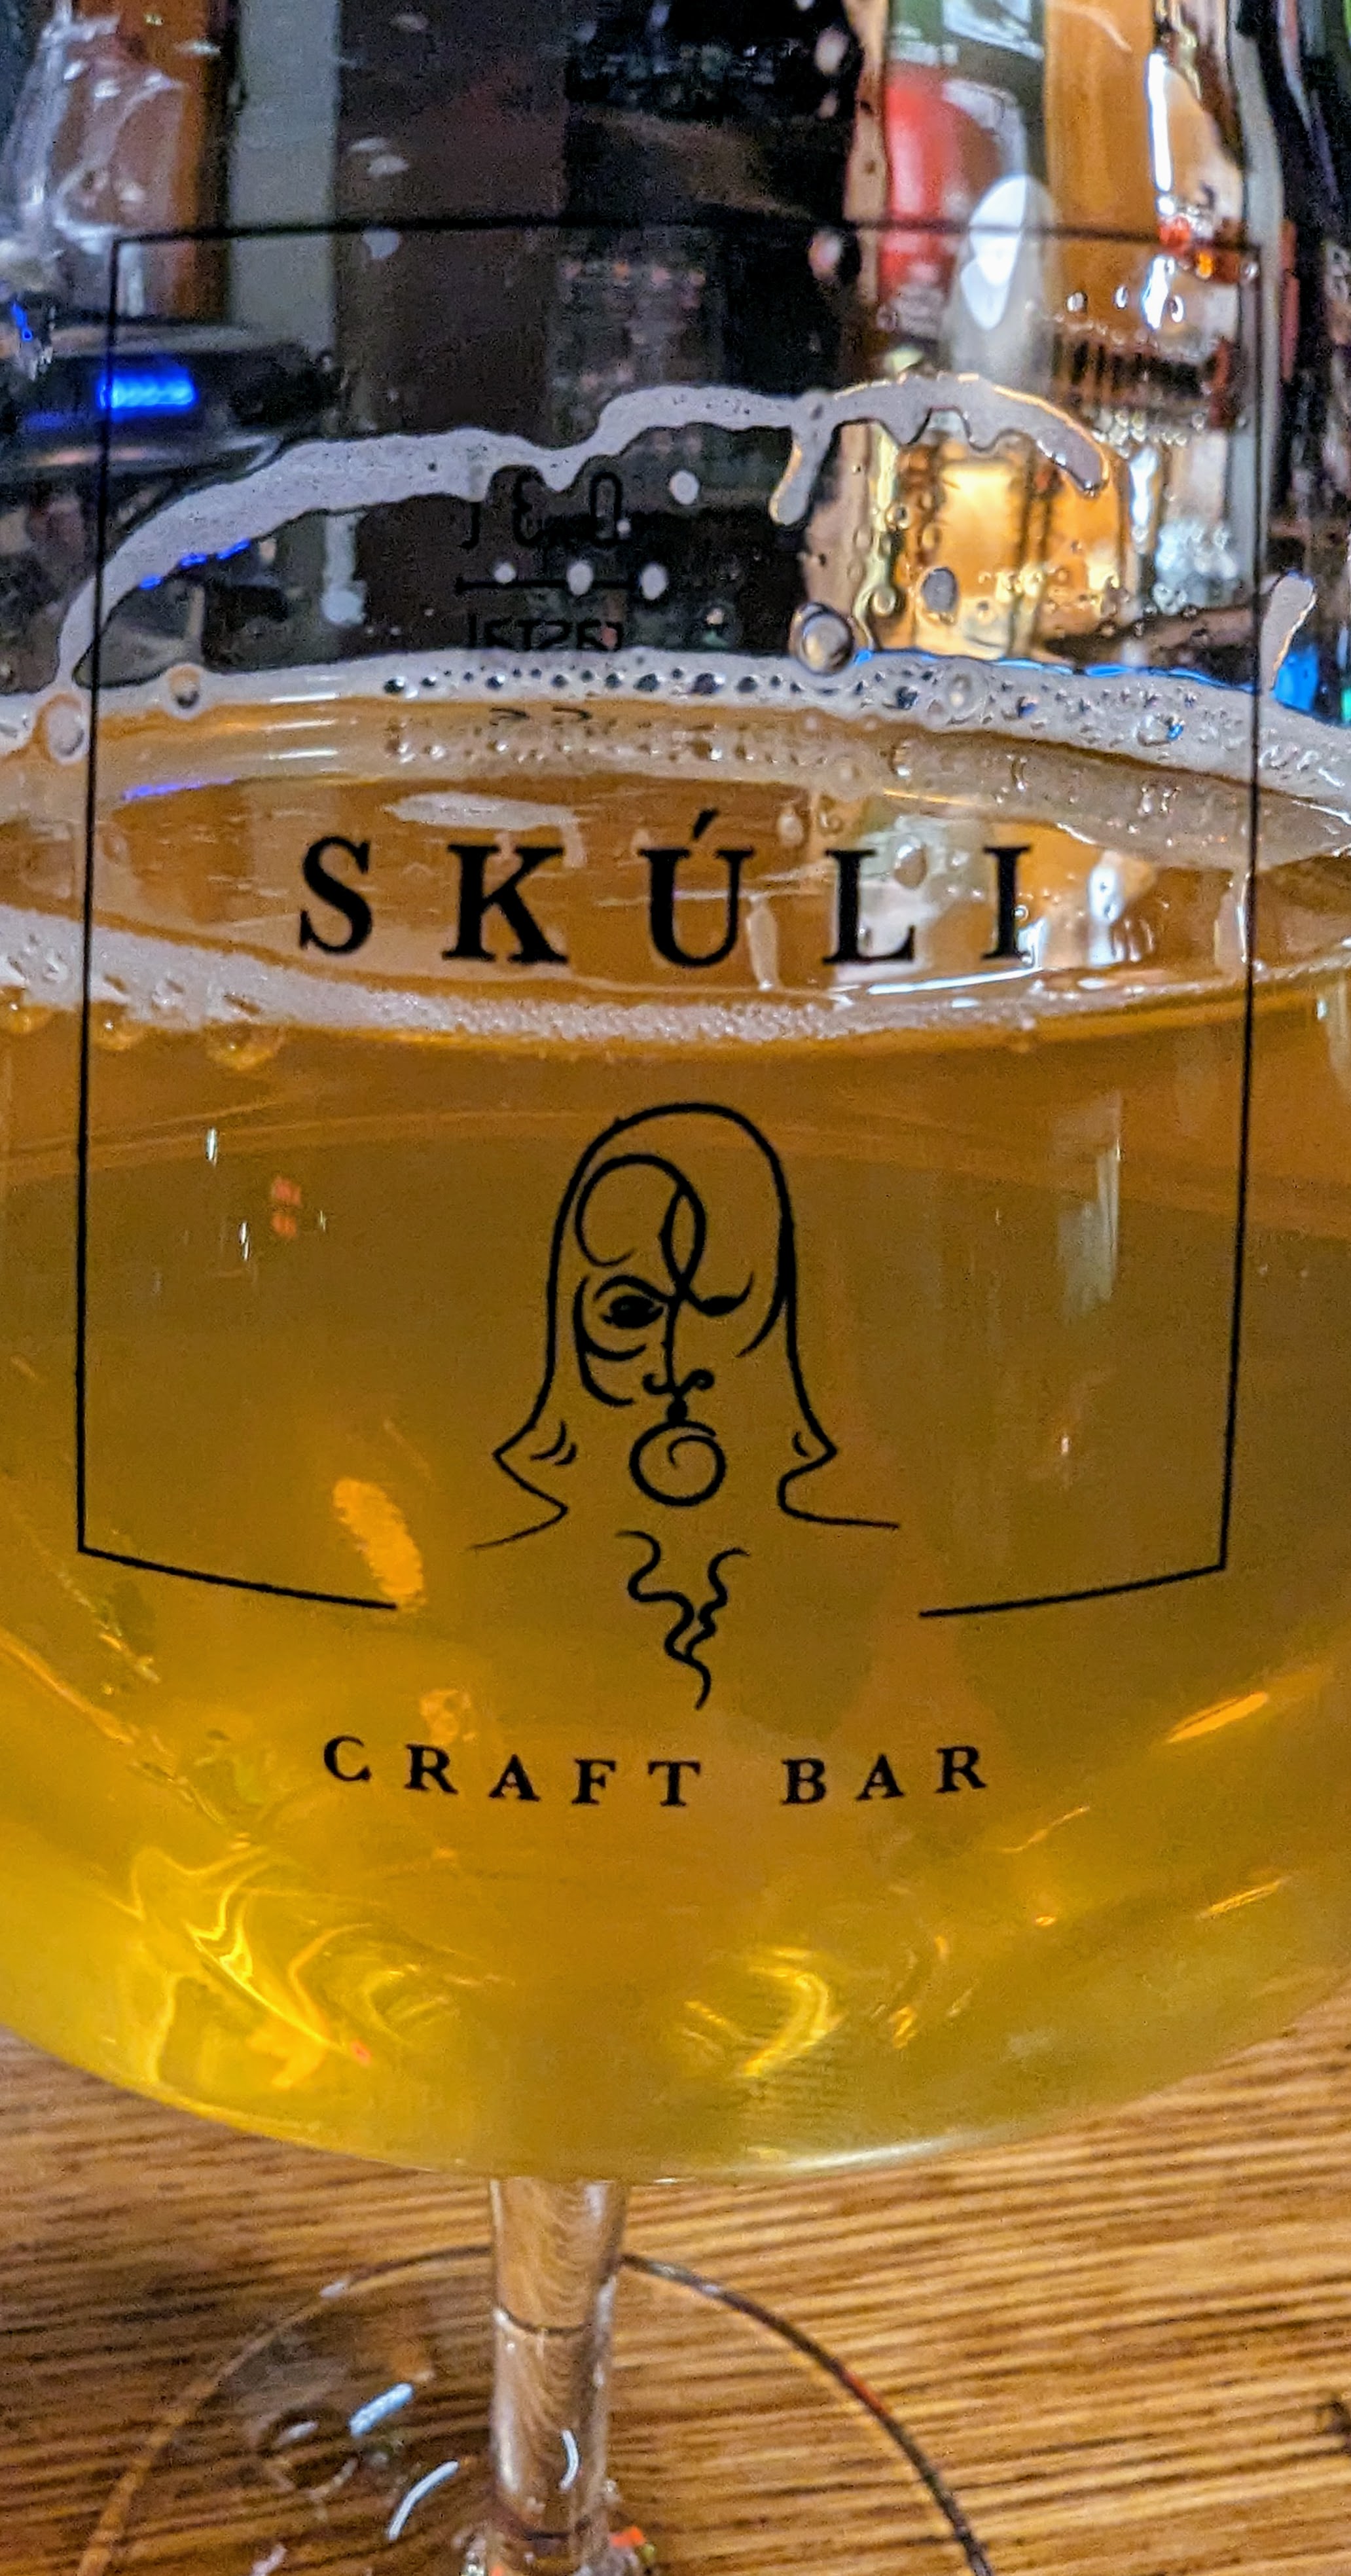 Beer glass from Skúli craft bar in Iceland